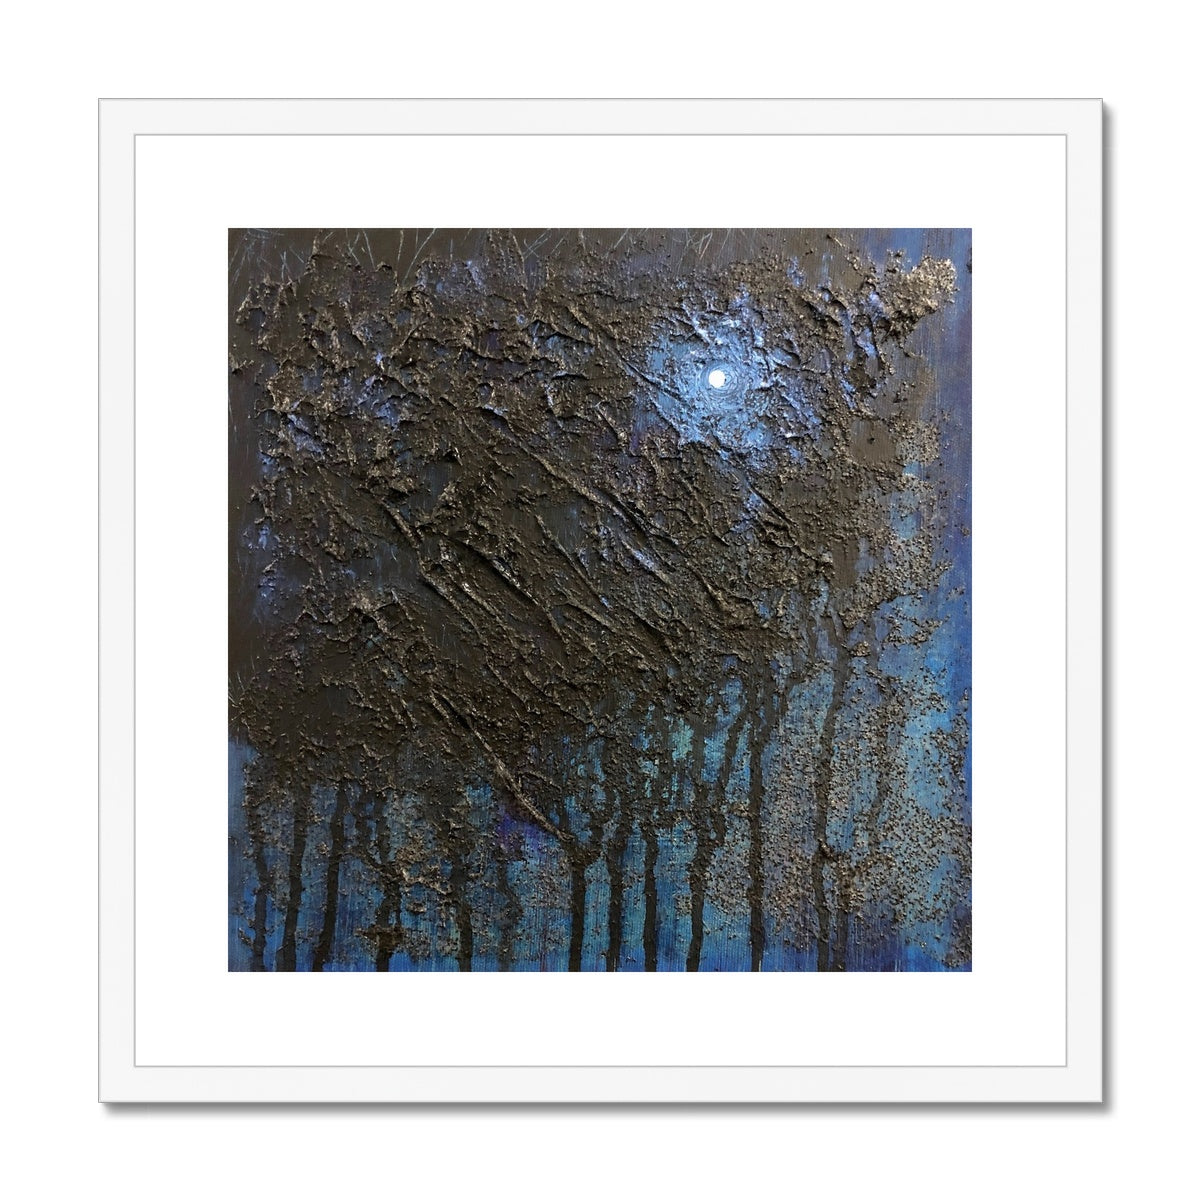 The Blue Moon Wood Abstract Painting | Framed & Mounted Prints From Scotland-Framed & Mounted Prints-Abstract & Impressionistic Art Gallery-20"x20"-White Frame-Paintings, Prints, Homeware, Art Gifts From Scotland By Scottish Artist Kevin Hunter